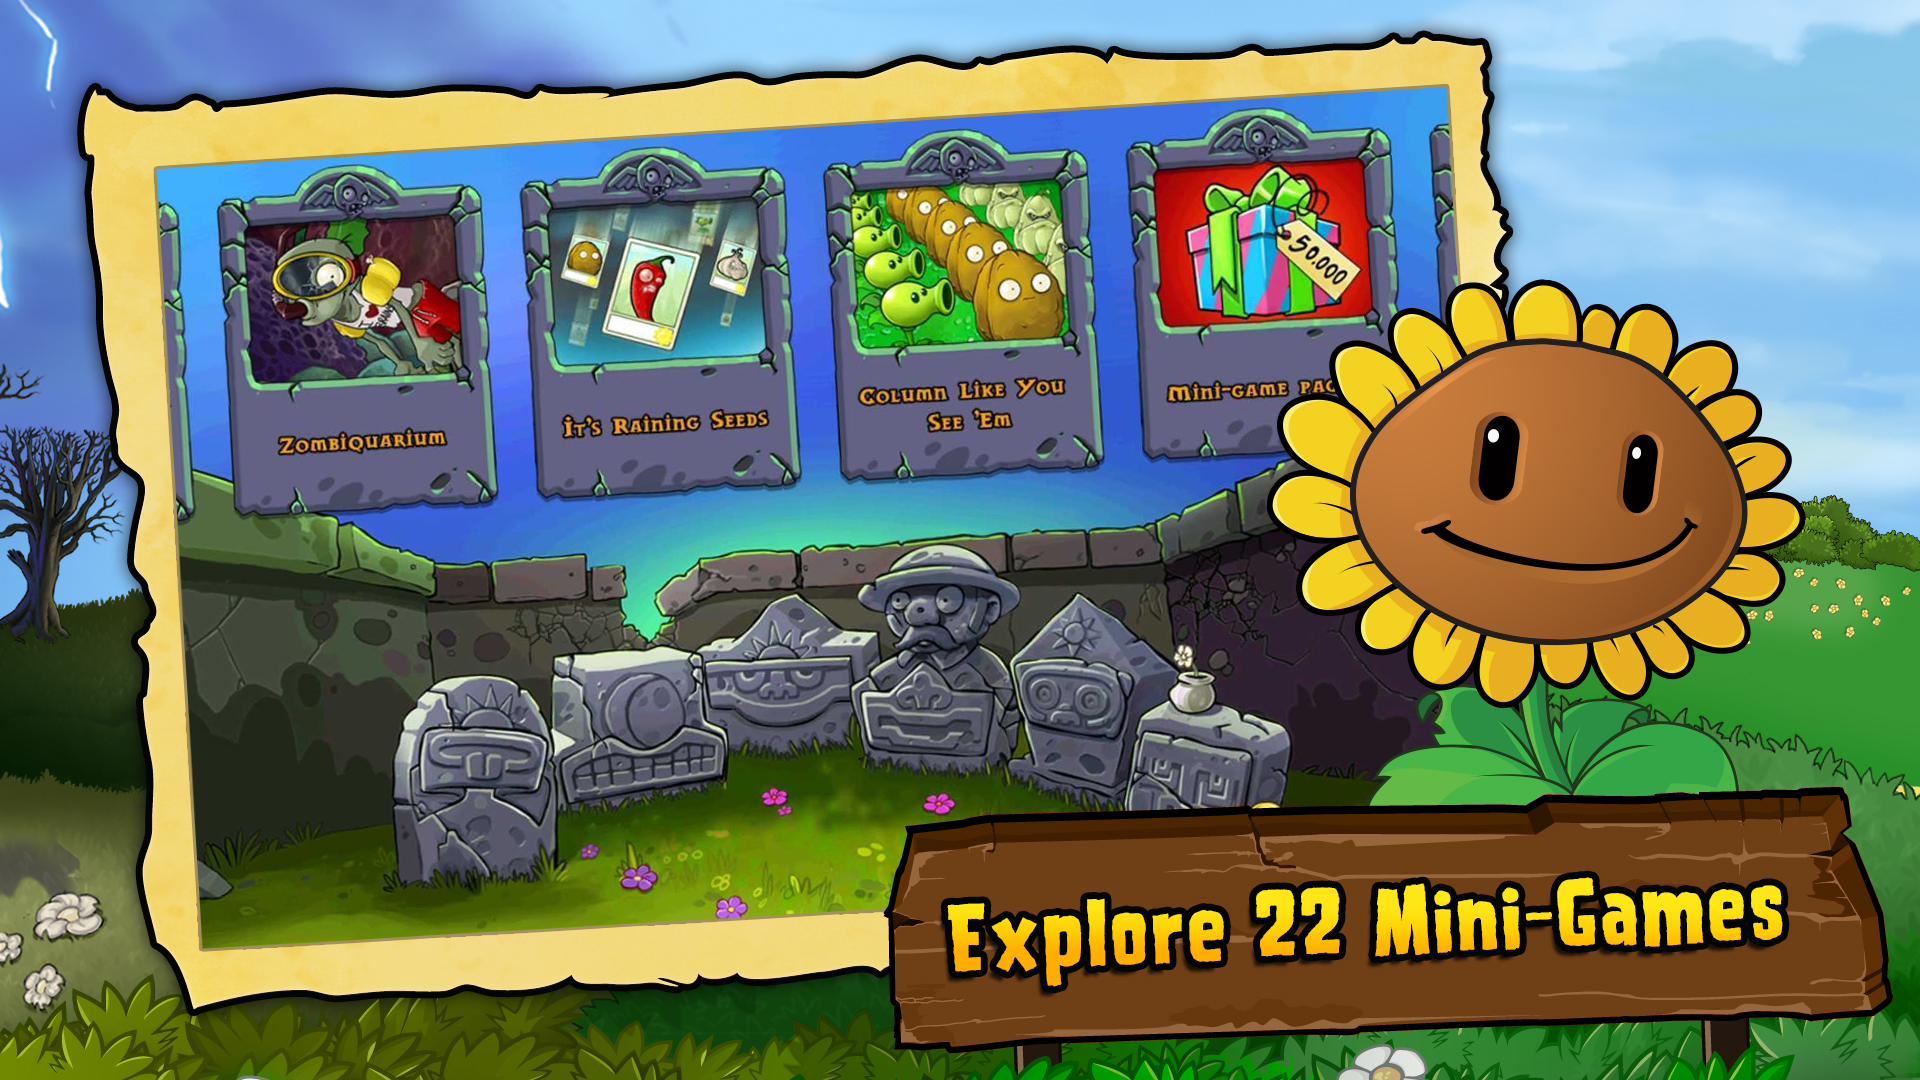 Get Plants Vs. Zombies (PC/Mac) for free - CNET